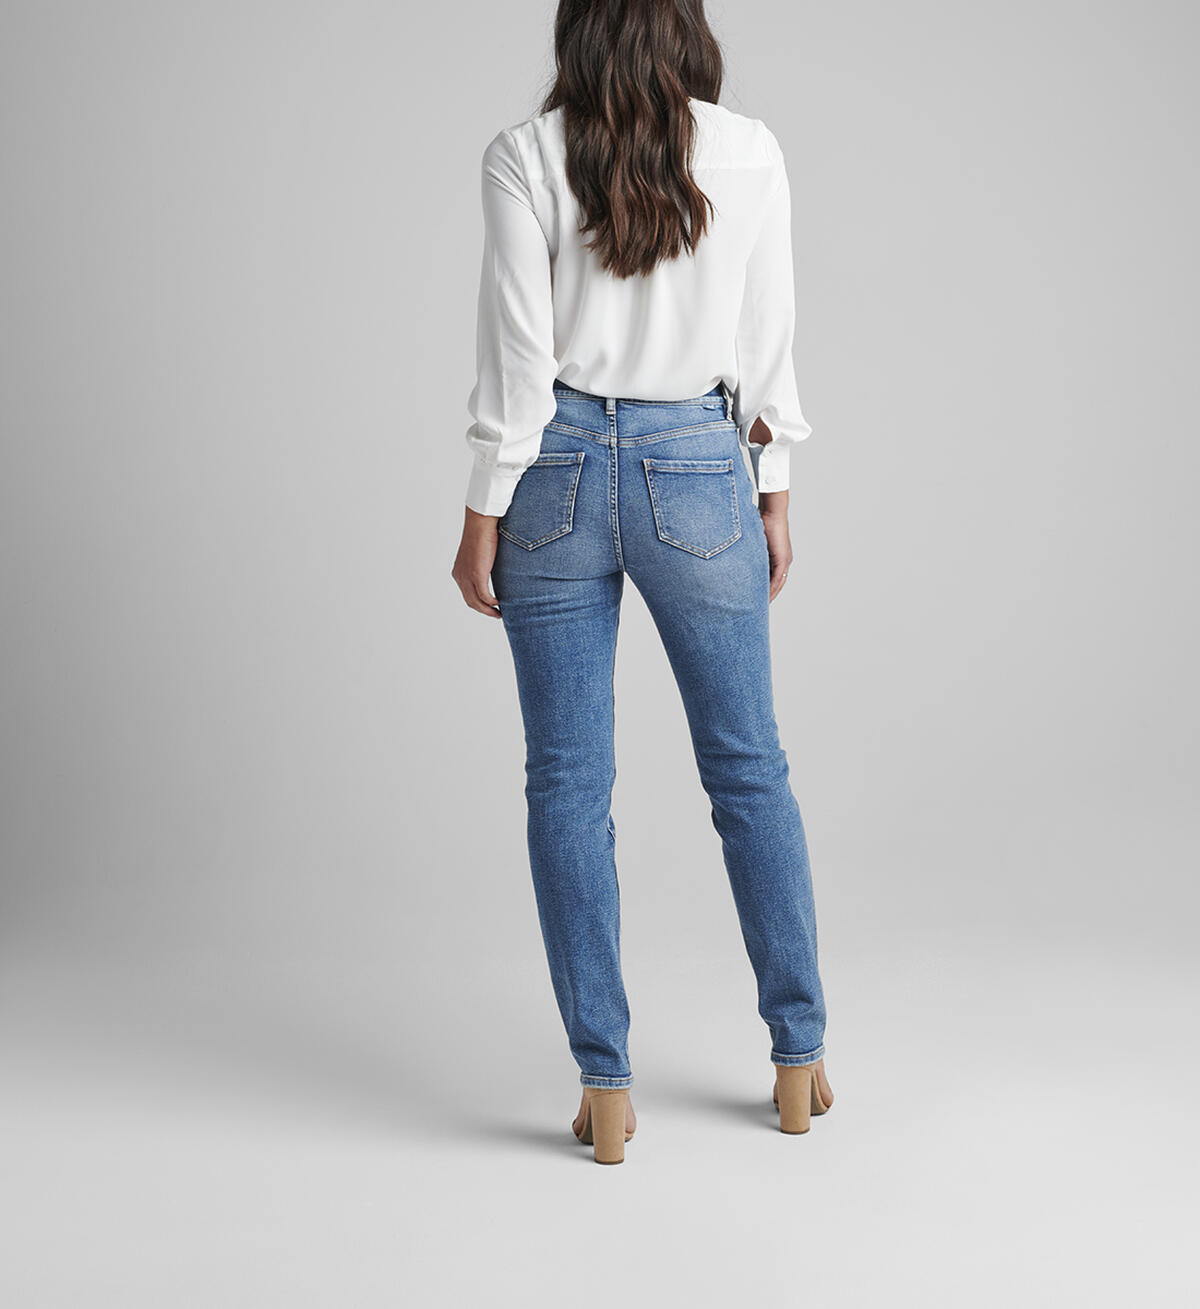 Valentina High Rise Straight Leg Pull-On Jeans Petite, , hi-res image number 1